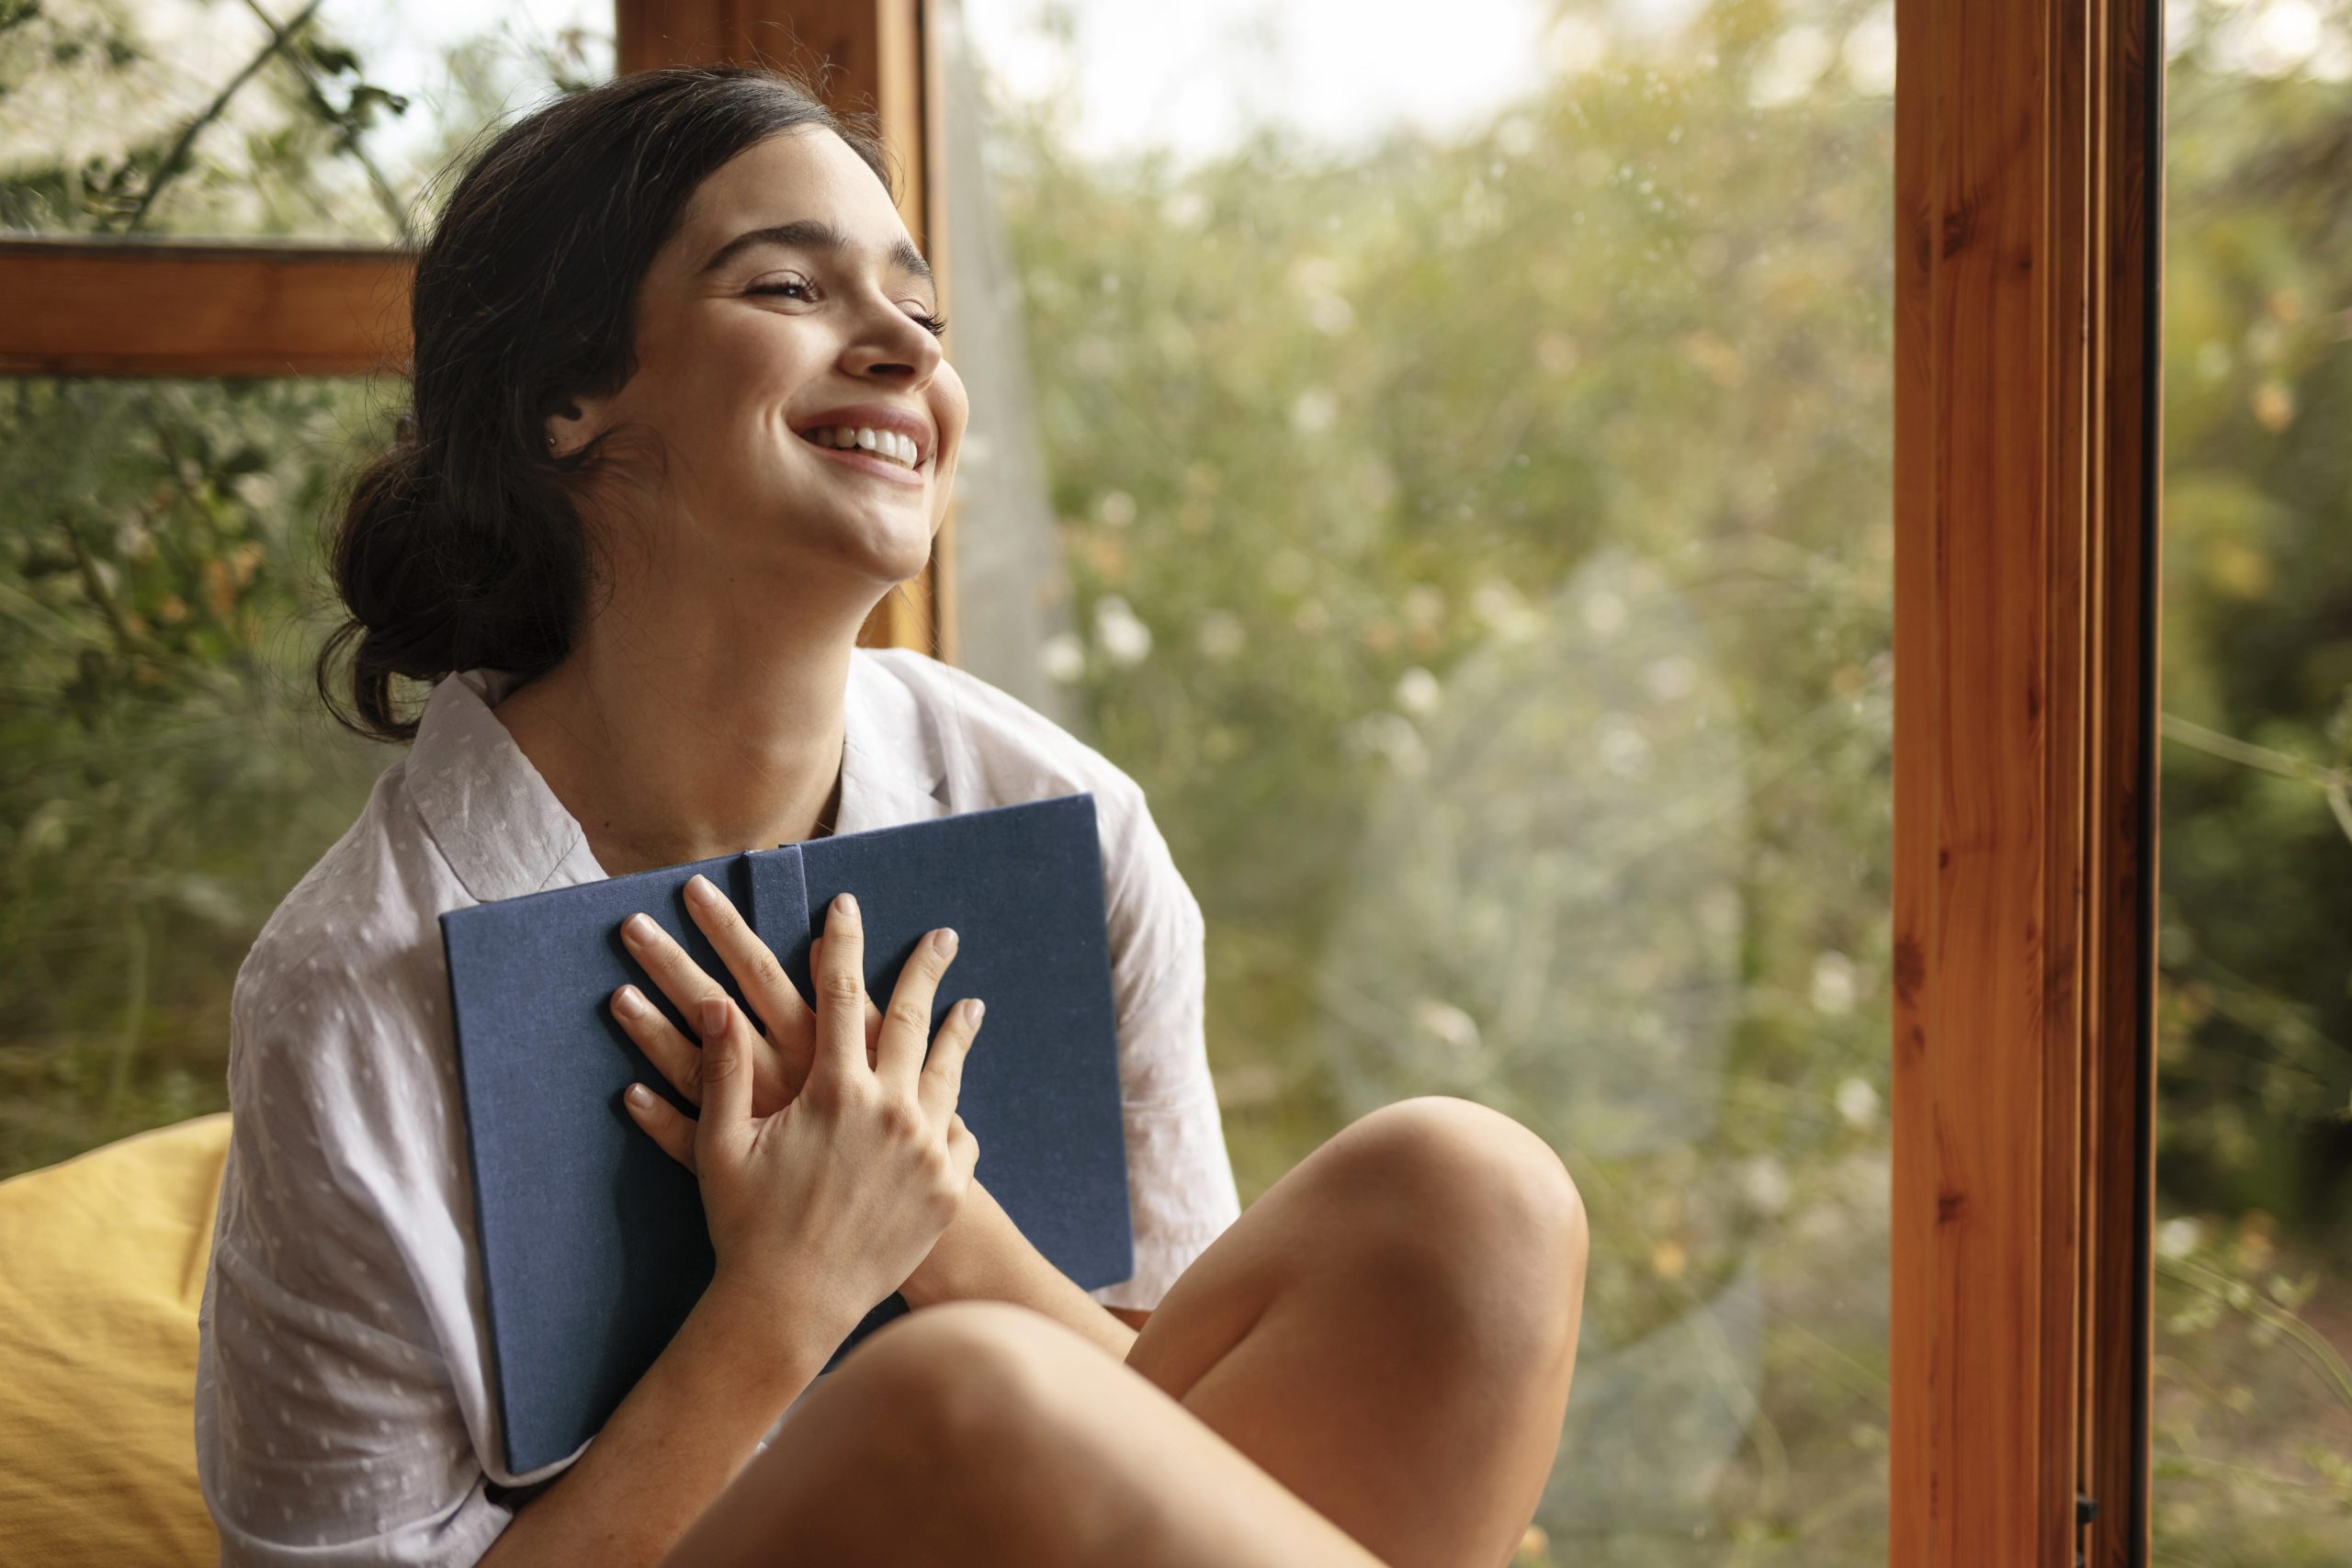 A person looking out of the window and smiling while holding a book against their chest, indicating practising self care tips for mental health.